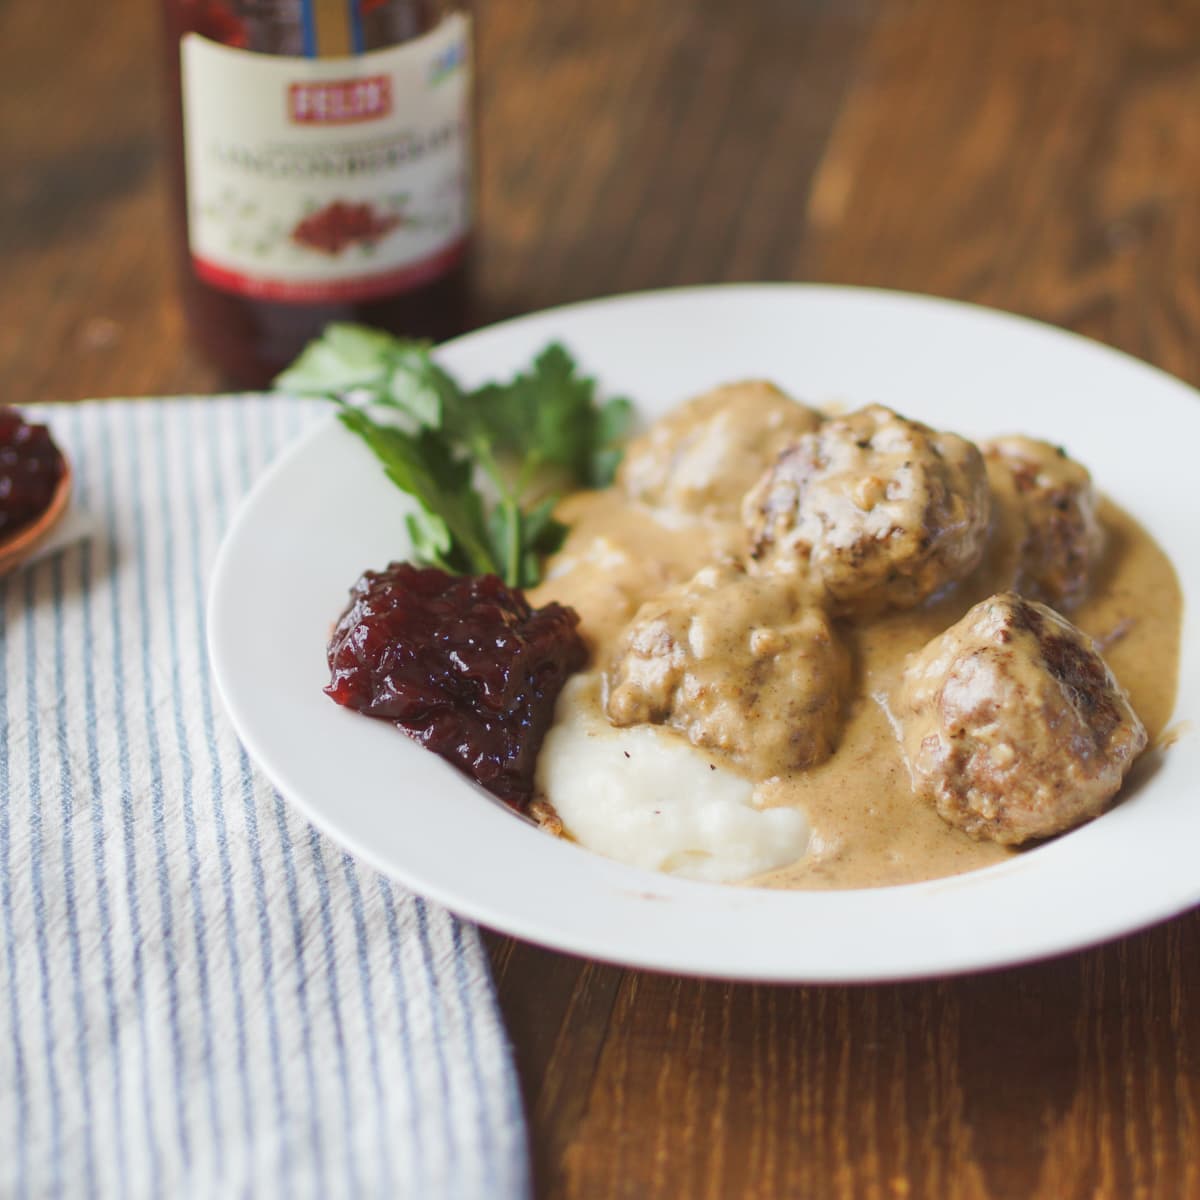 Swedish meatball served with lingonberries and mashed potatoes.